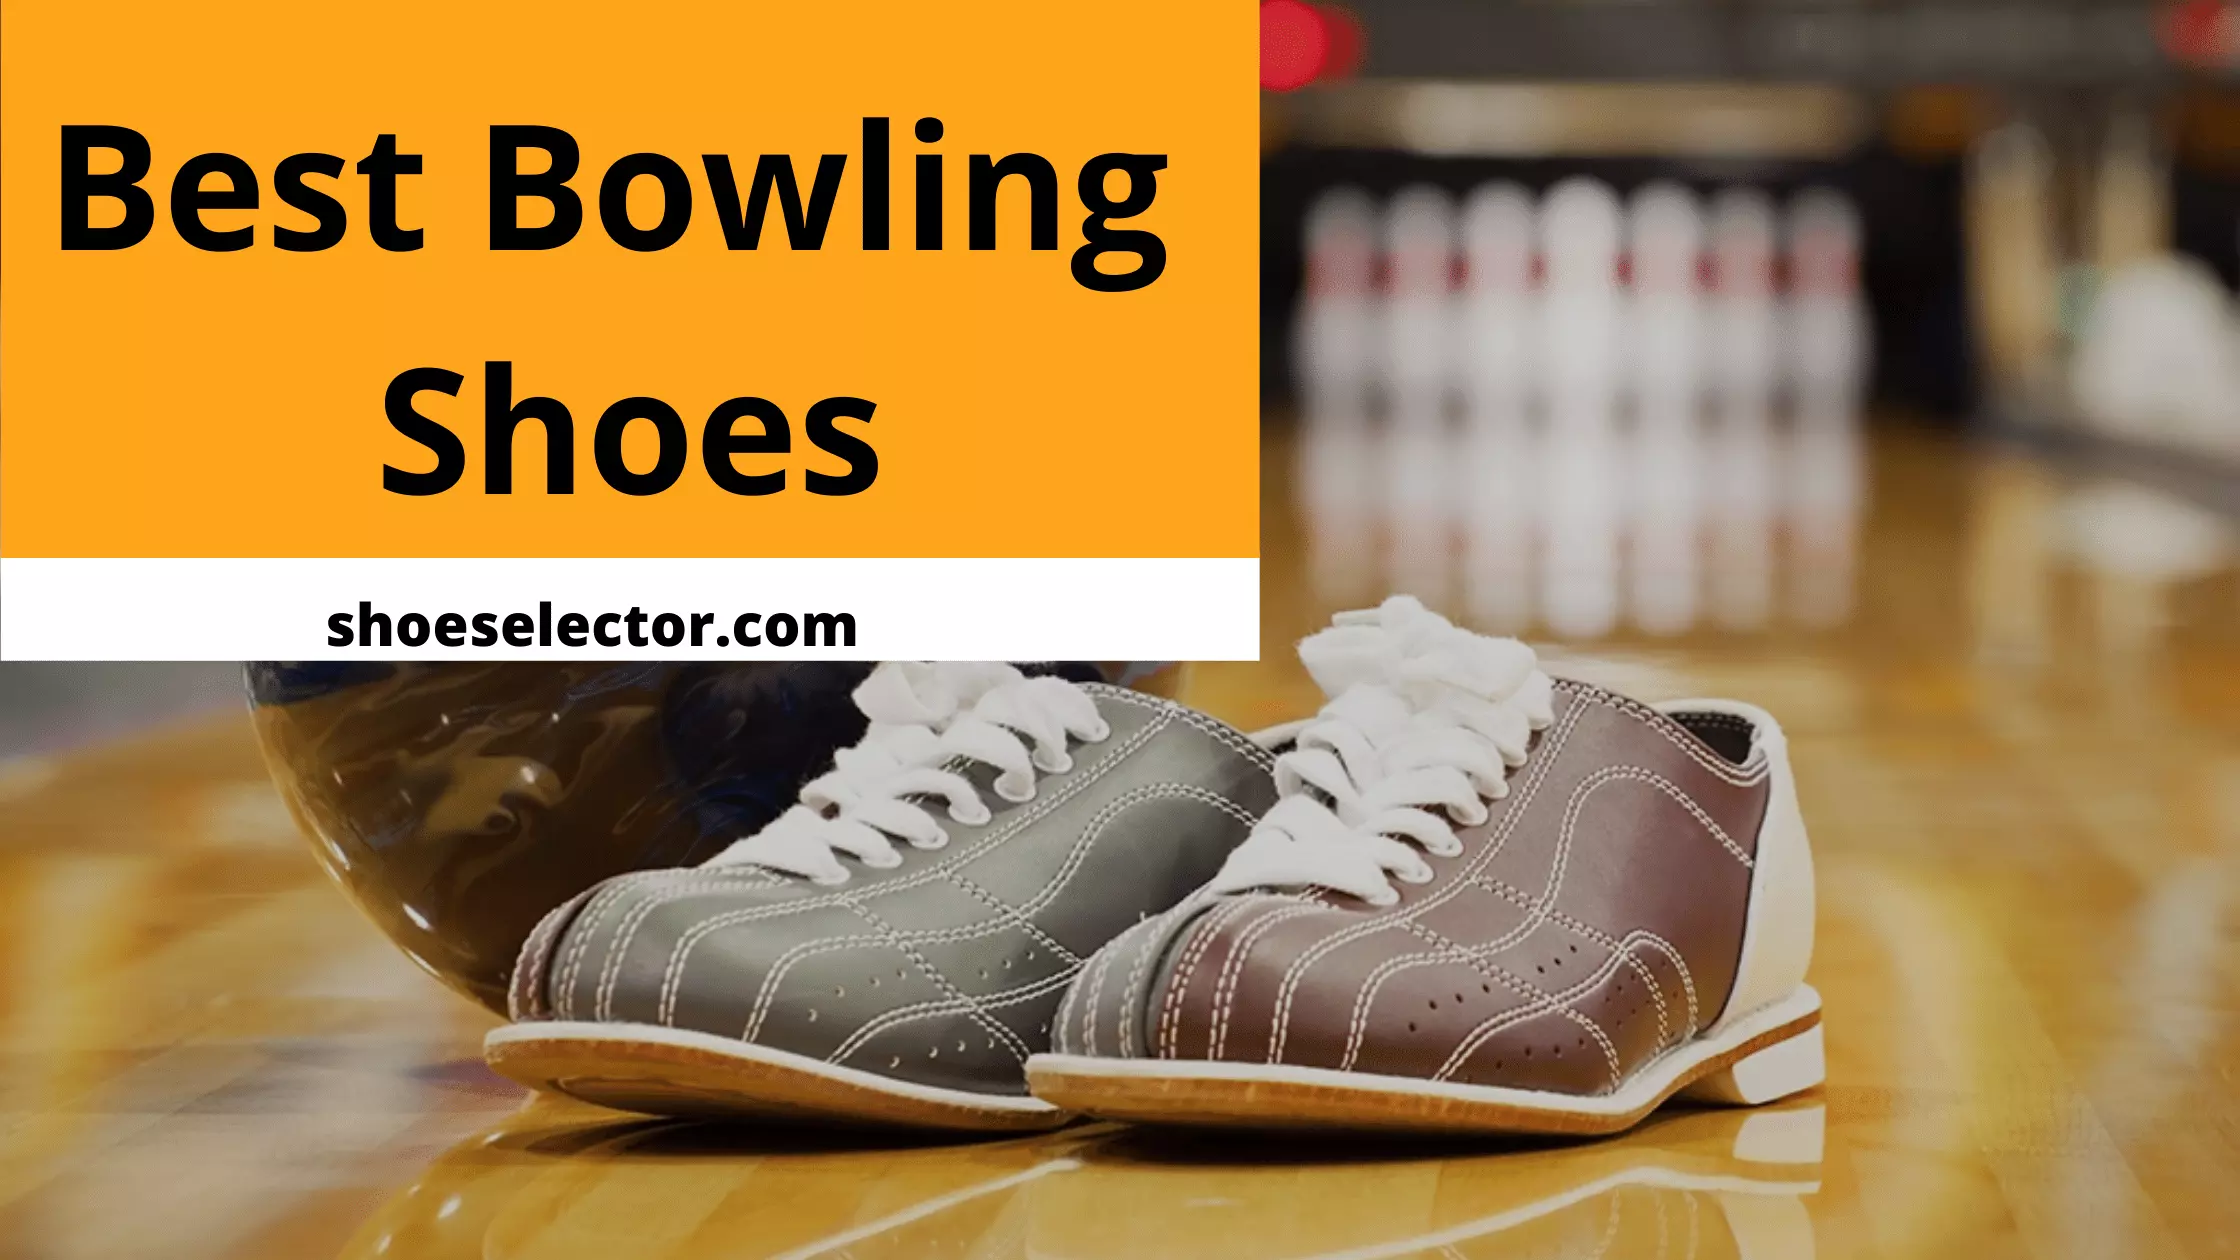 Best Bowling Shoes With Complete Details